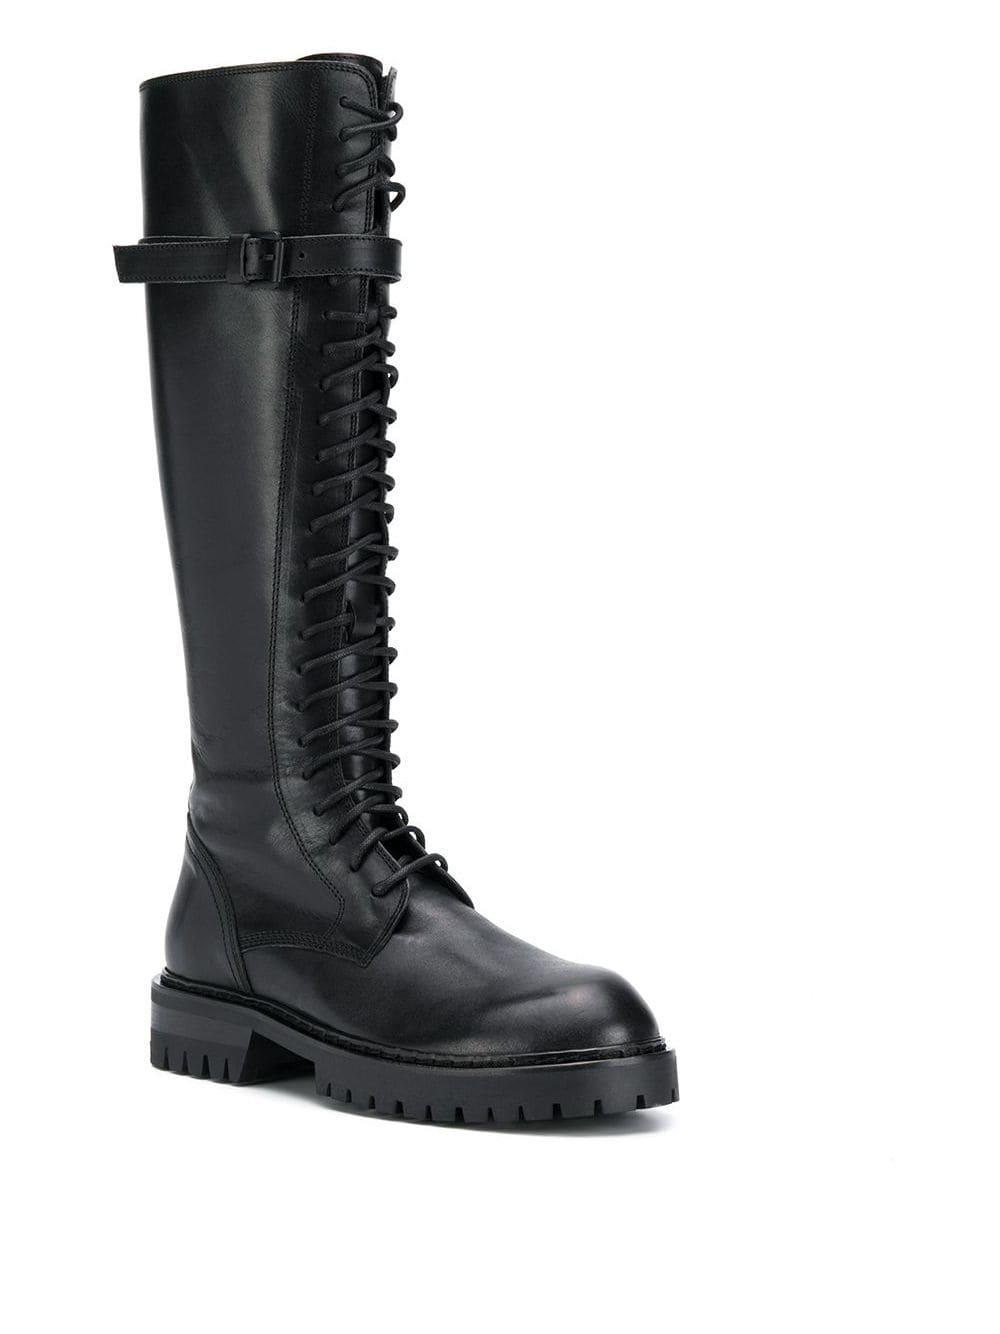 Ann Demeulemeester Leather Lace-up Knee-length Boots in Black - Lyst